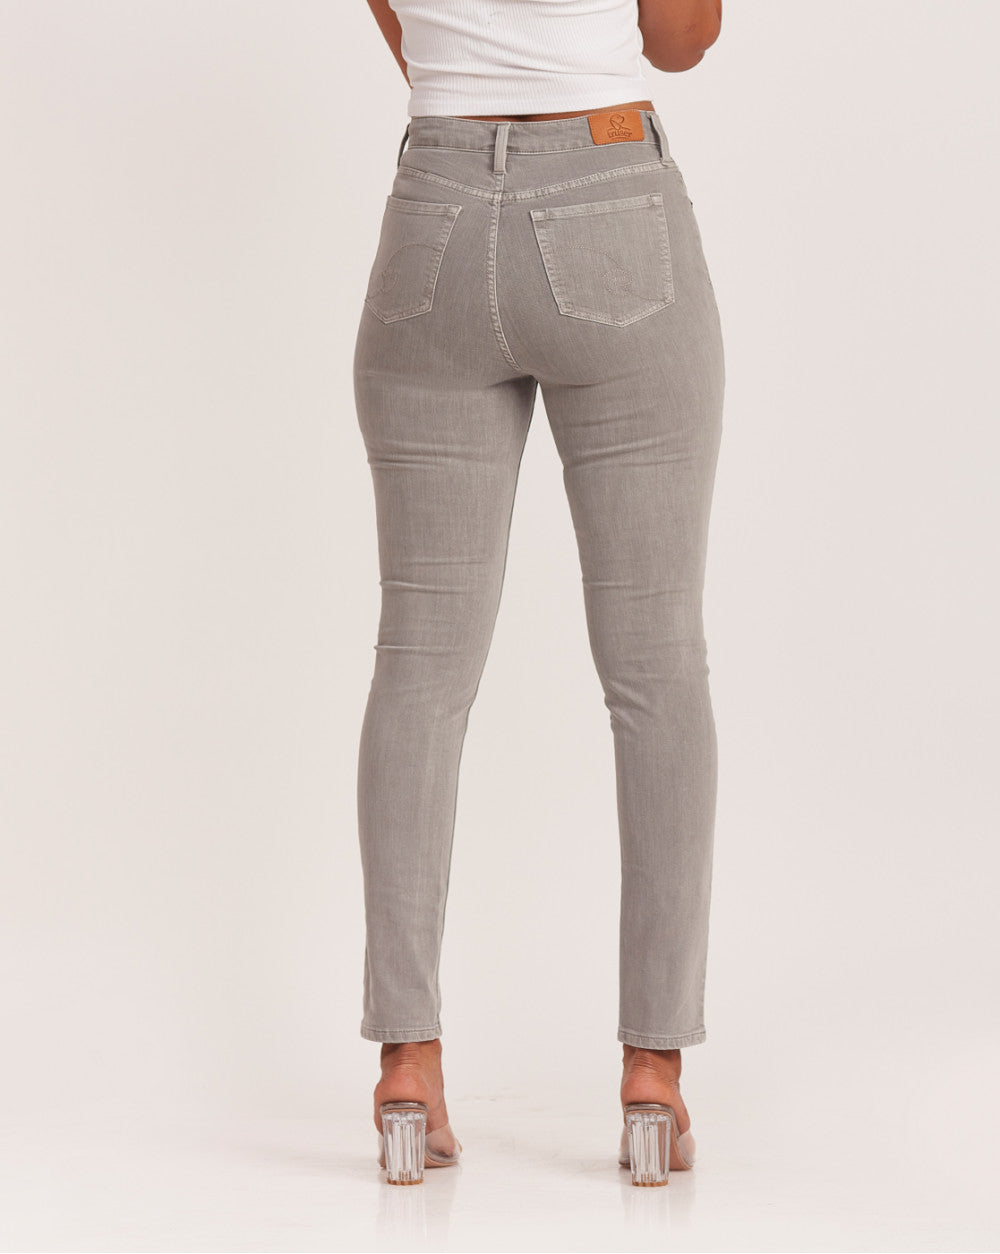 Skinny Fit High Waist Colored Jeans - Soft Grey